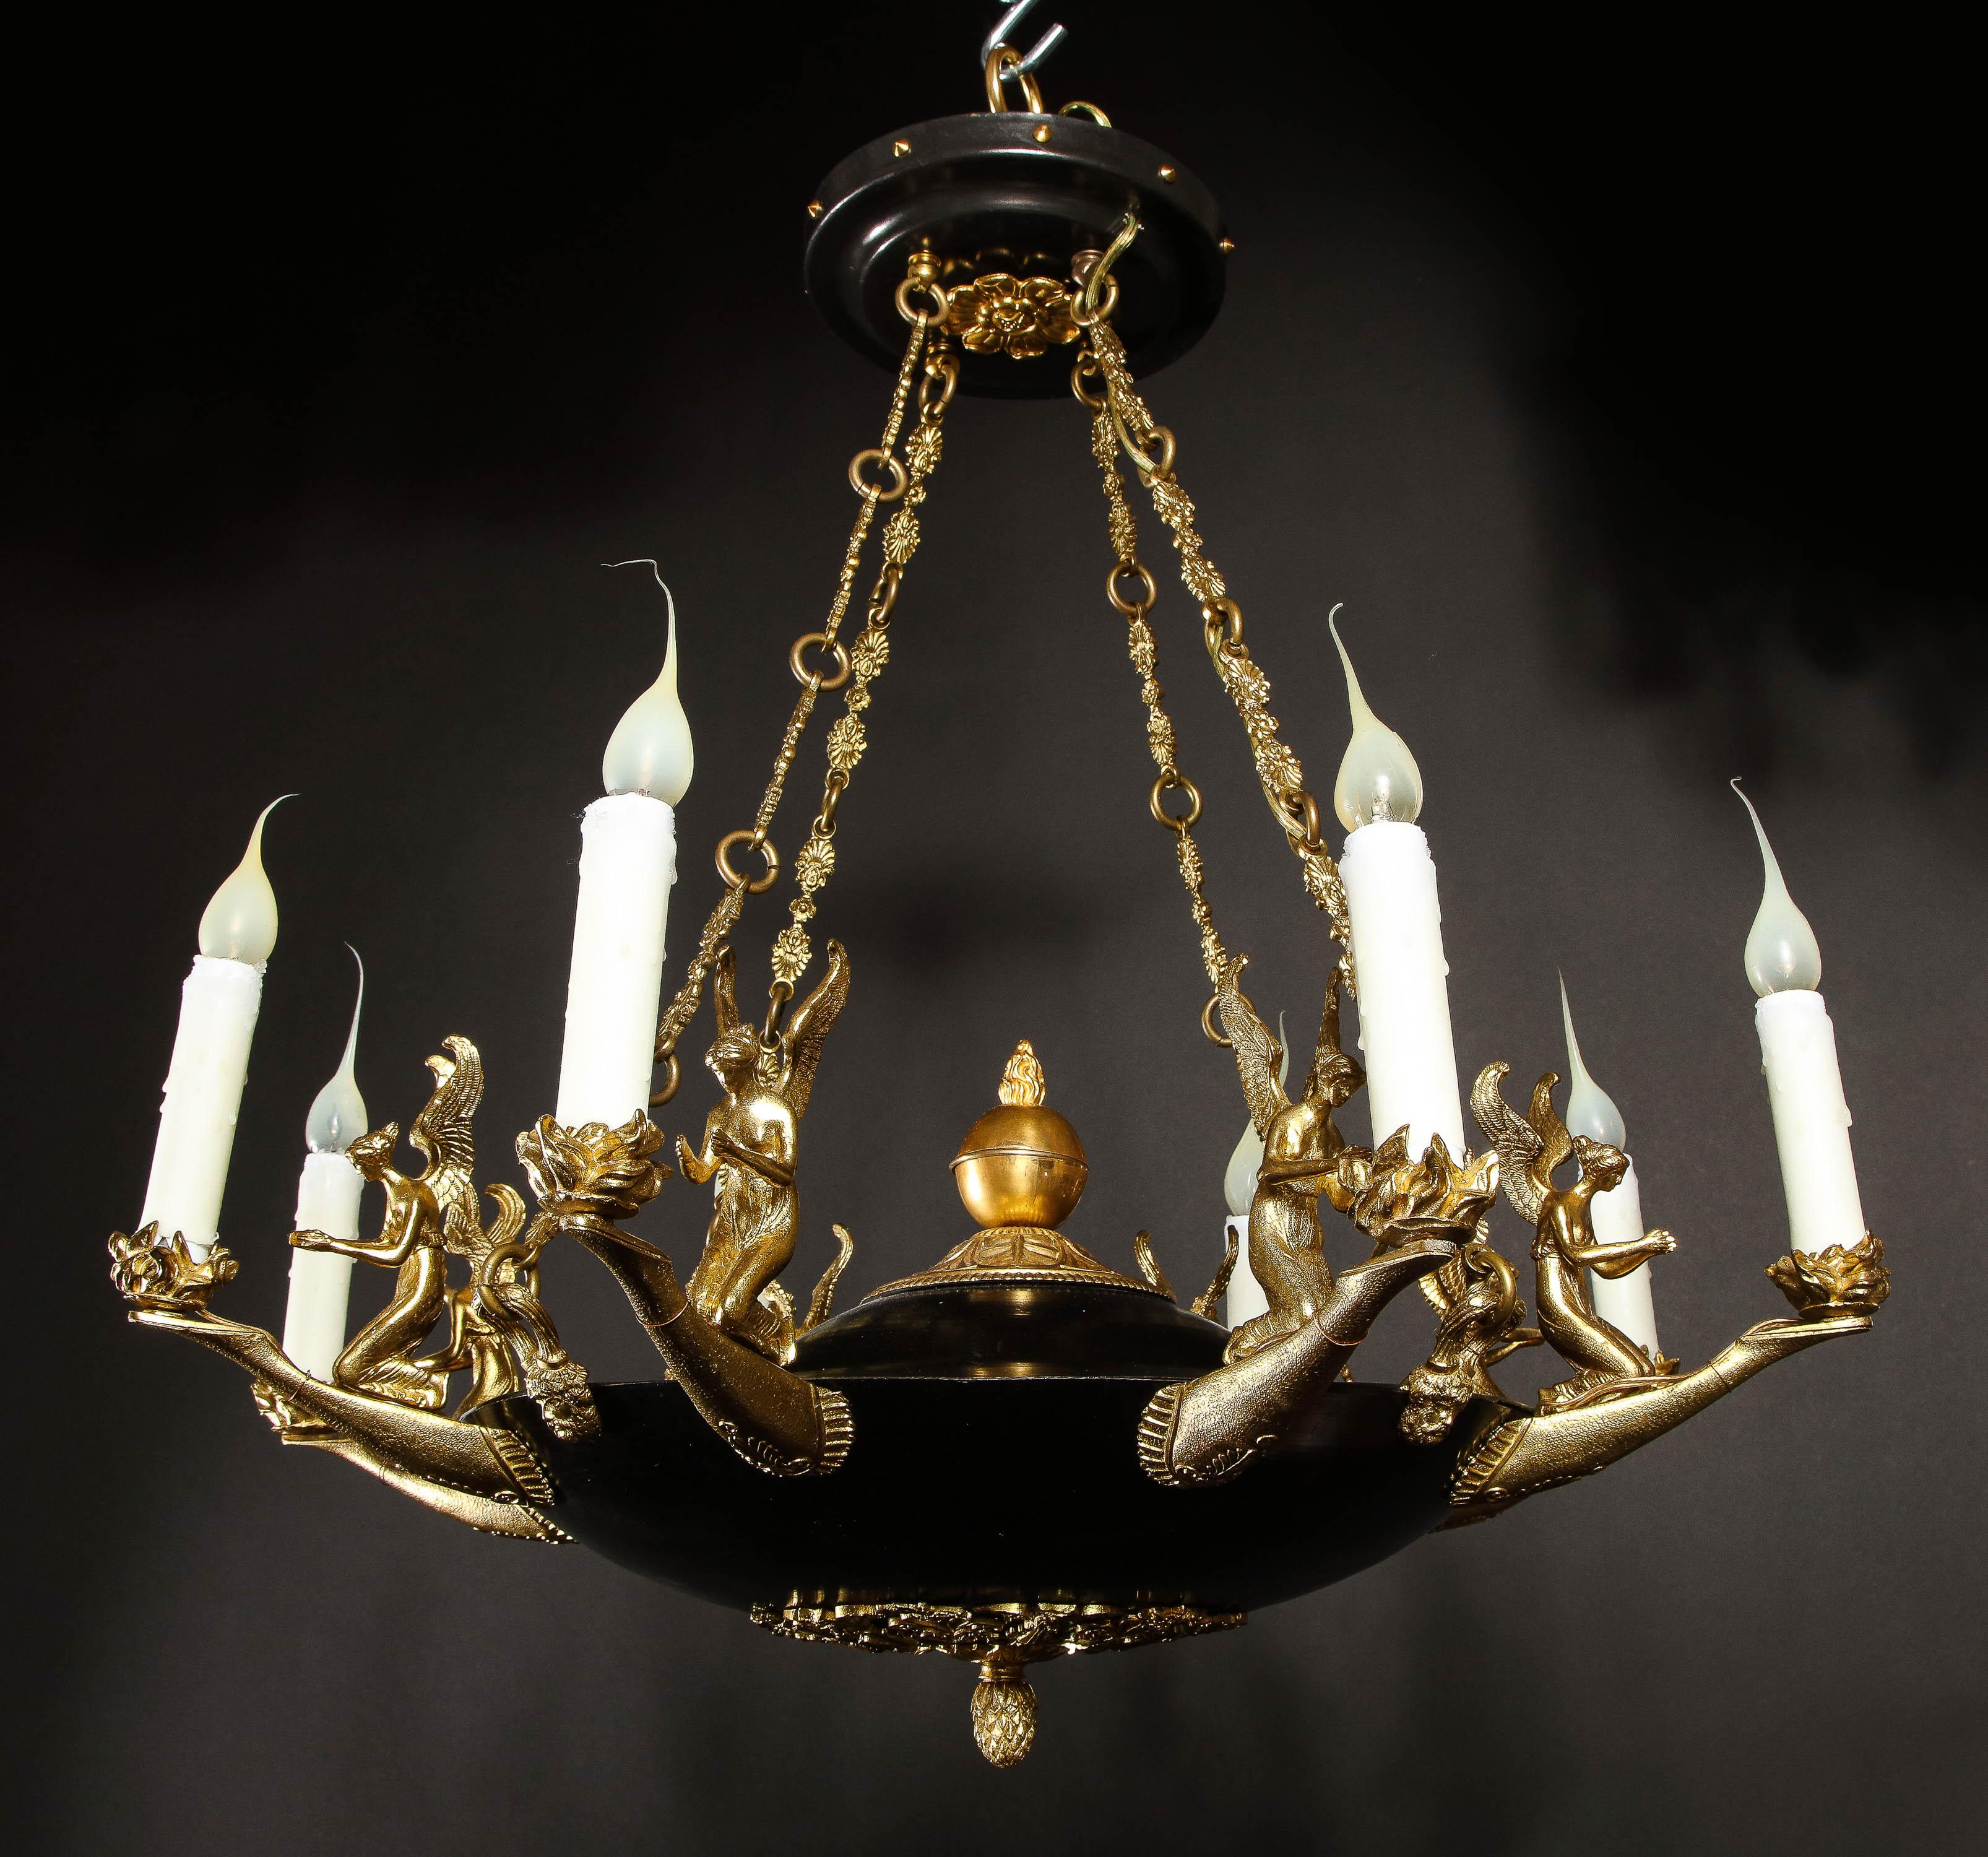 Pair of Antique French Empire Style Figural Gilt & Patina Bronze Chandeliers For Sale 12